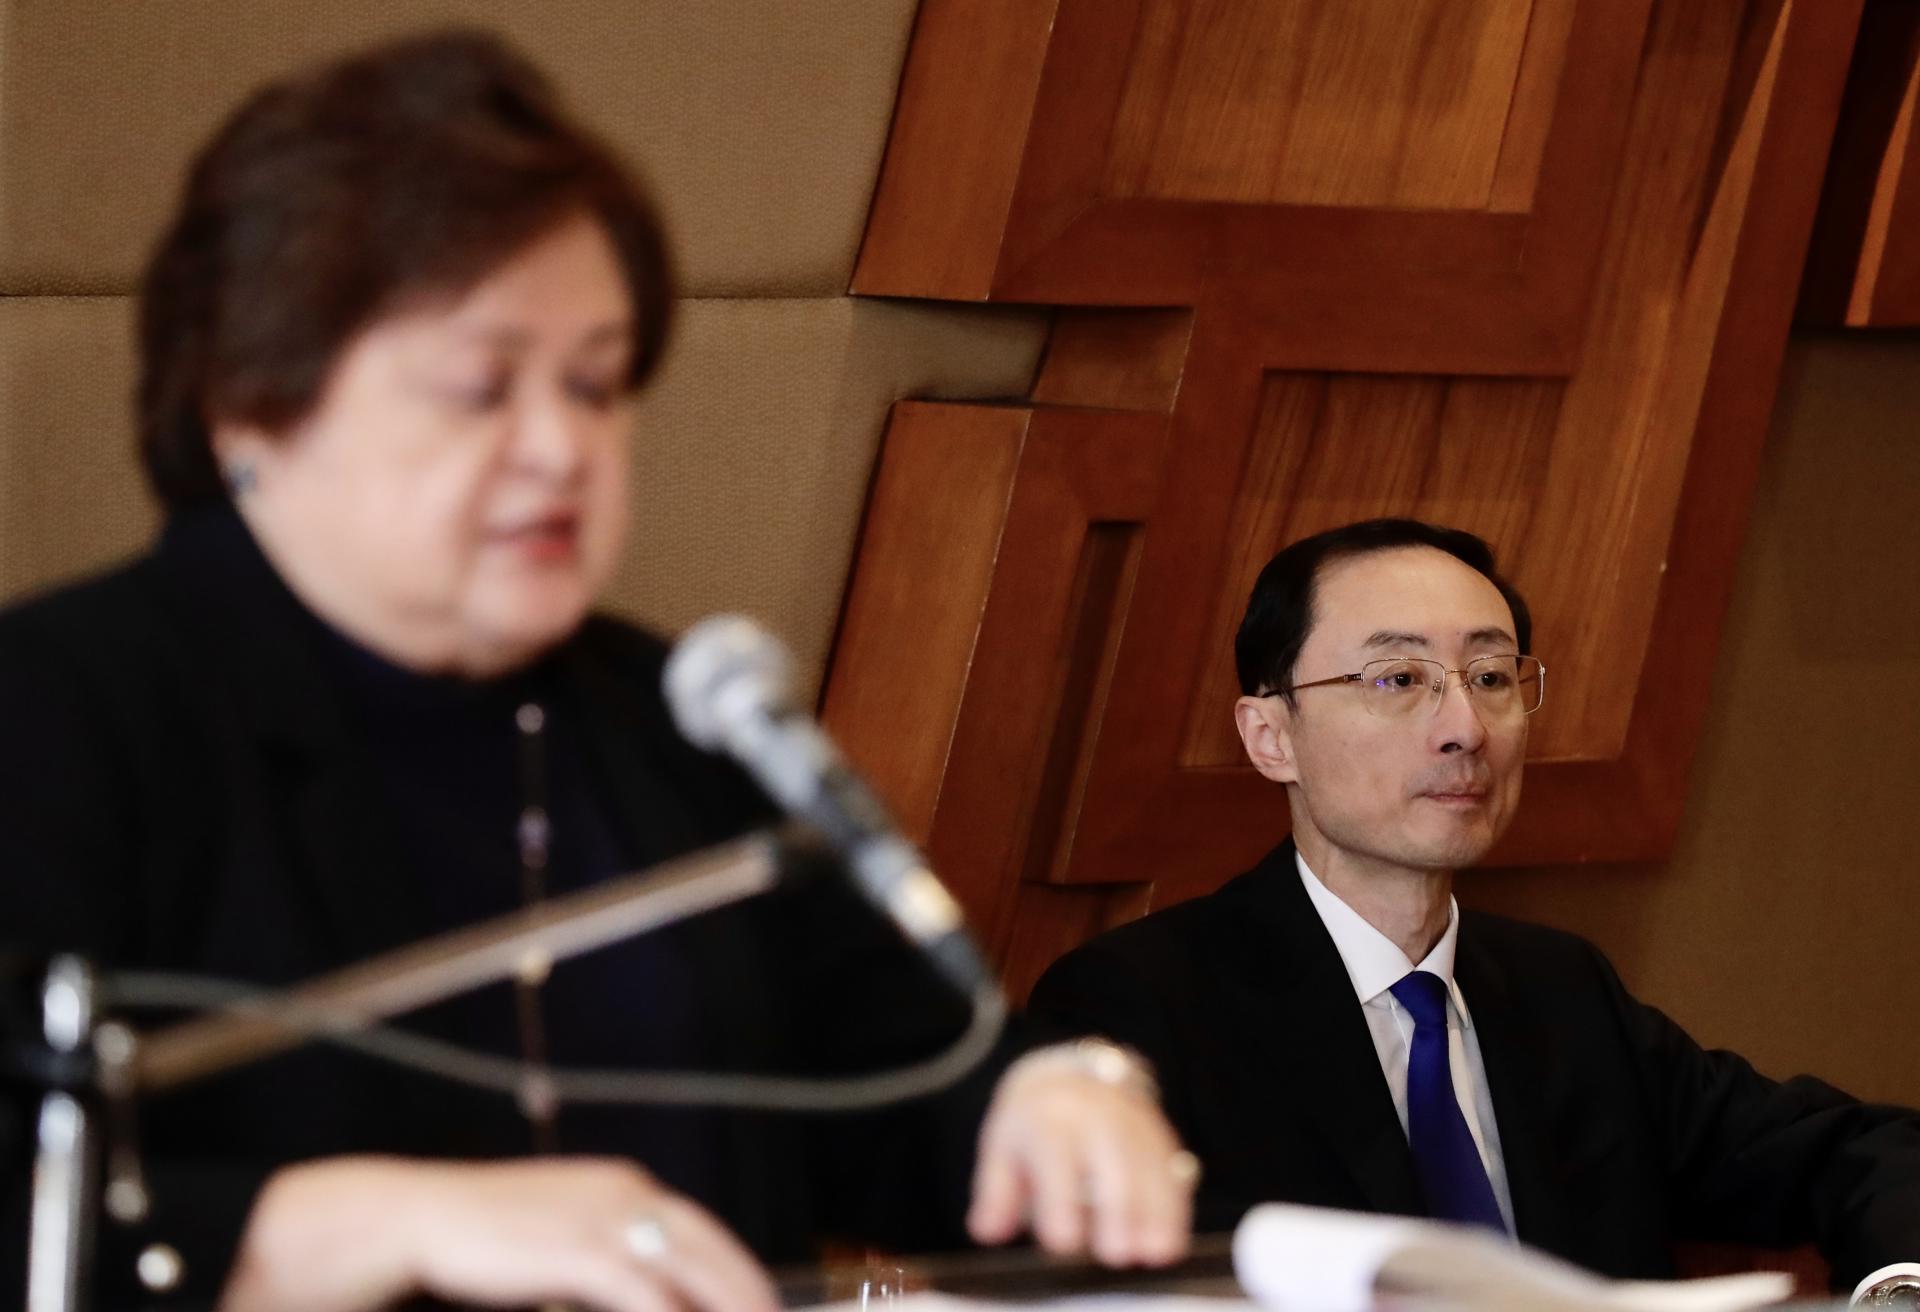 Filipino Foreign Affairs Undersecretary Maria Lourdes Lazaro (L) speaks while Chinese Vice Foreign Minister Sun Weidong (R) listens during a bilateral meeting in Manila, Philippines, 24 March 2023. EFE/EPA/FRANCIS R. MALASIG / POOL